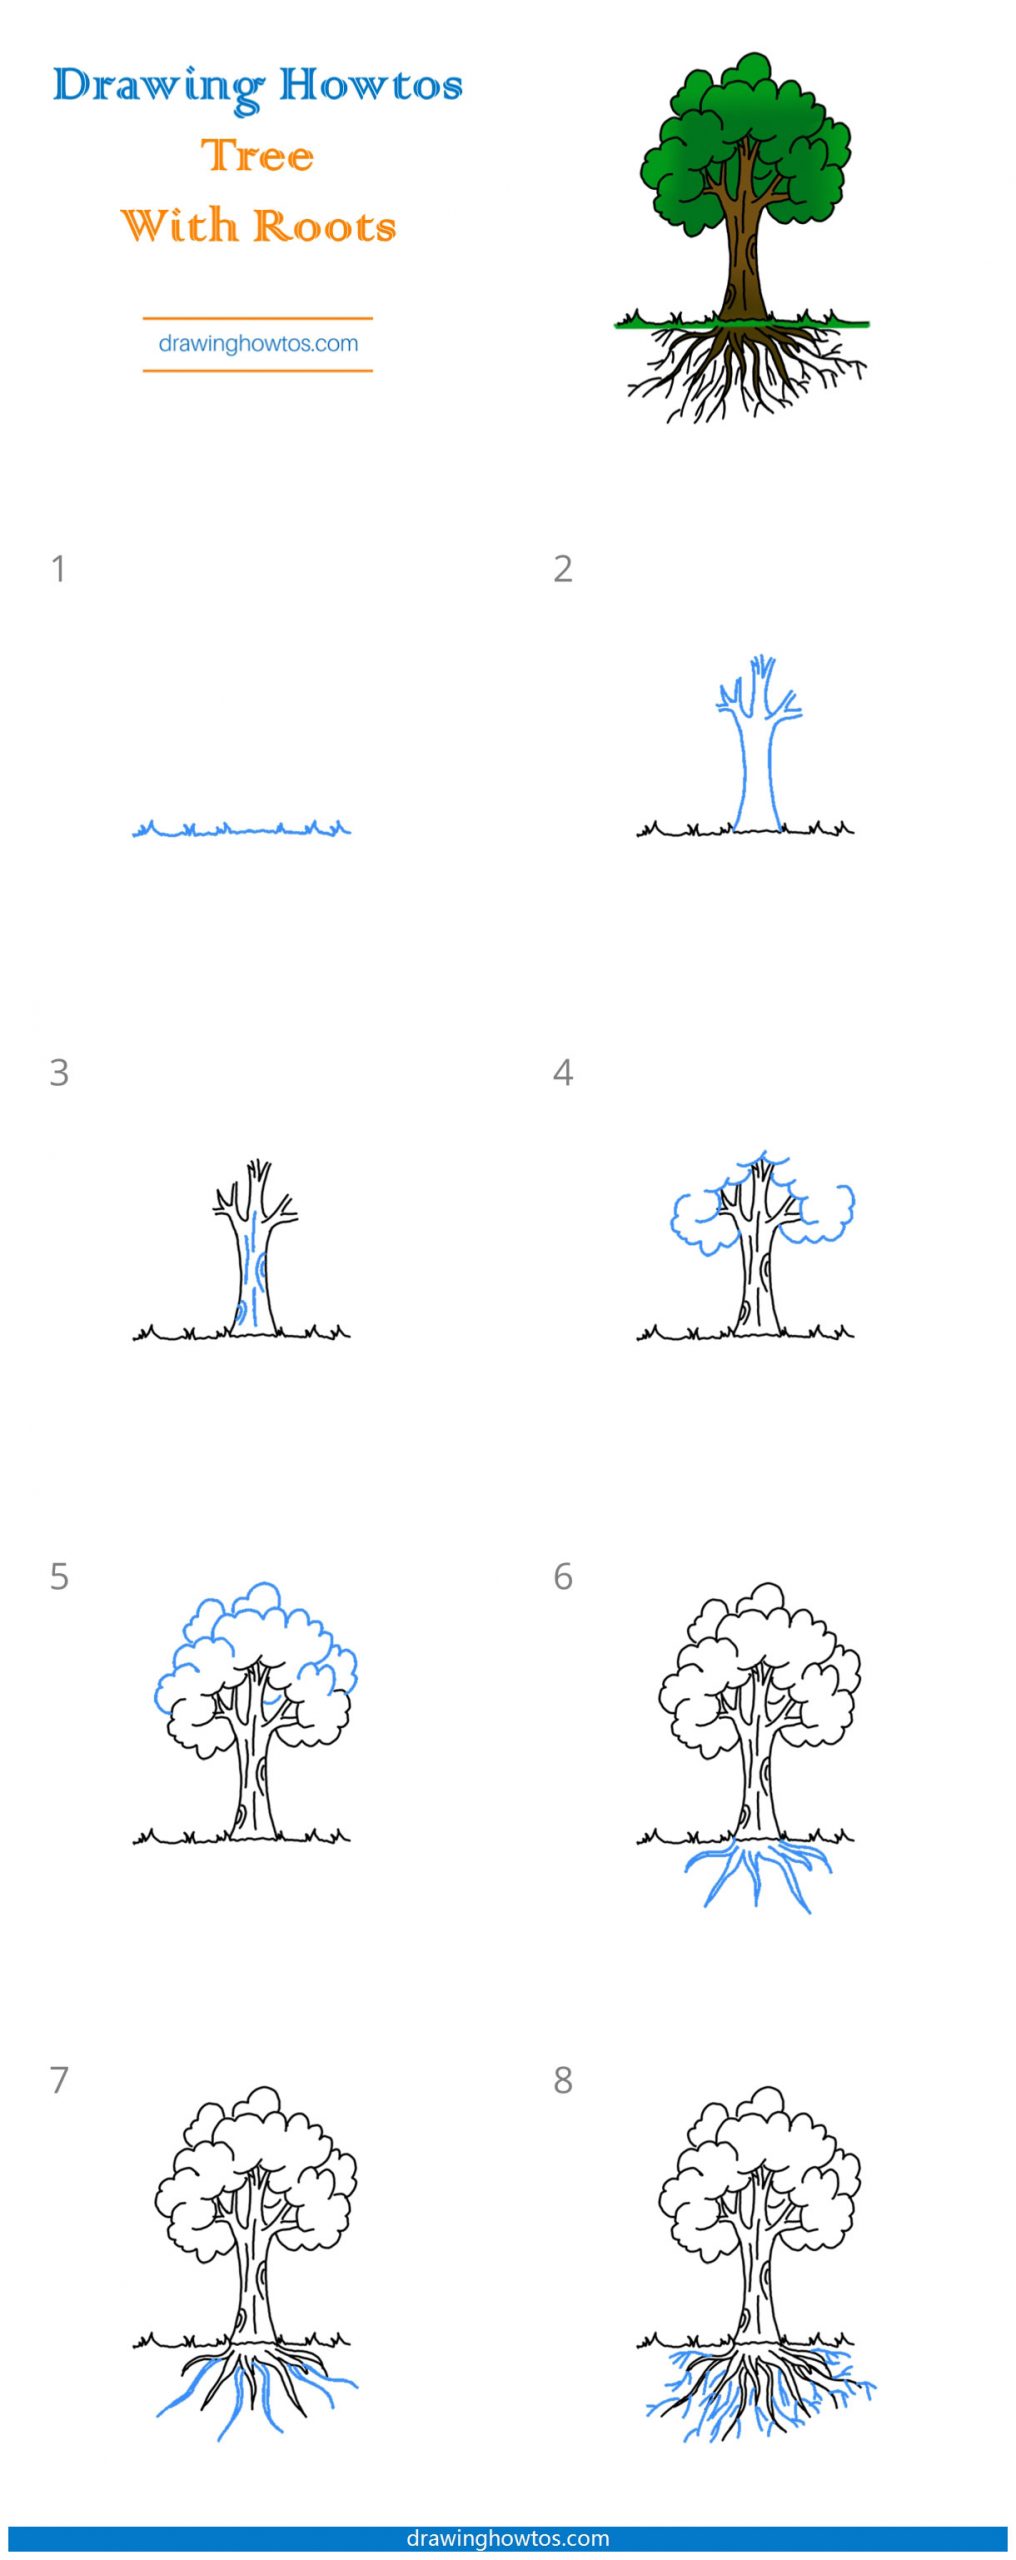 How to Draw a Tree with Roots Step by Step